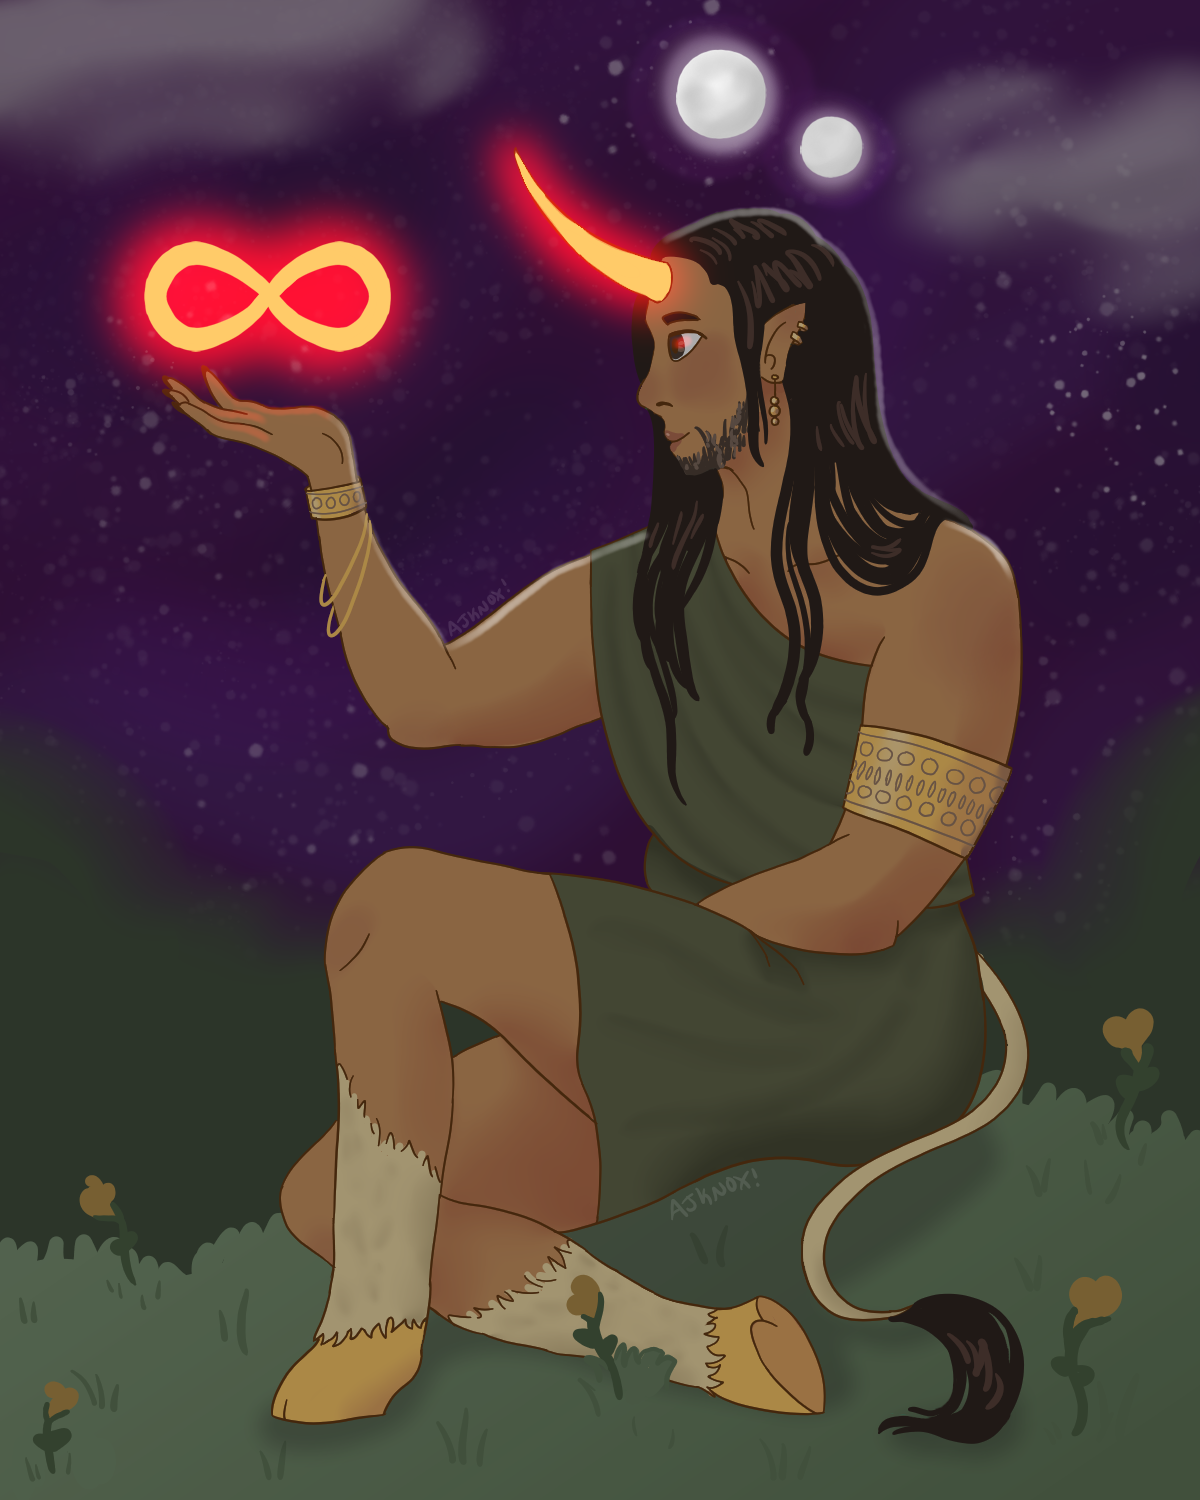 a tan-skinned bearded person with long hair sits on the ground. instead of feet, they have hooves, and their shins are covered in white fur. they're wearing a green dress and golden jewelry. they have pointy ears, a unicorn tail, and a horn coming out of their forehead. the horn is glowing orange, the same shade as an infinity sign floating in their hand. they have a serene expression on their face.